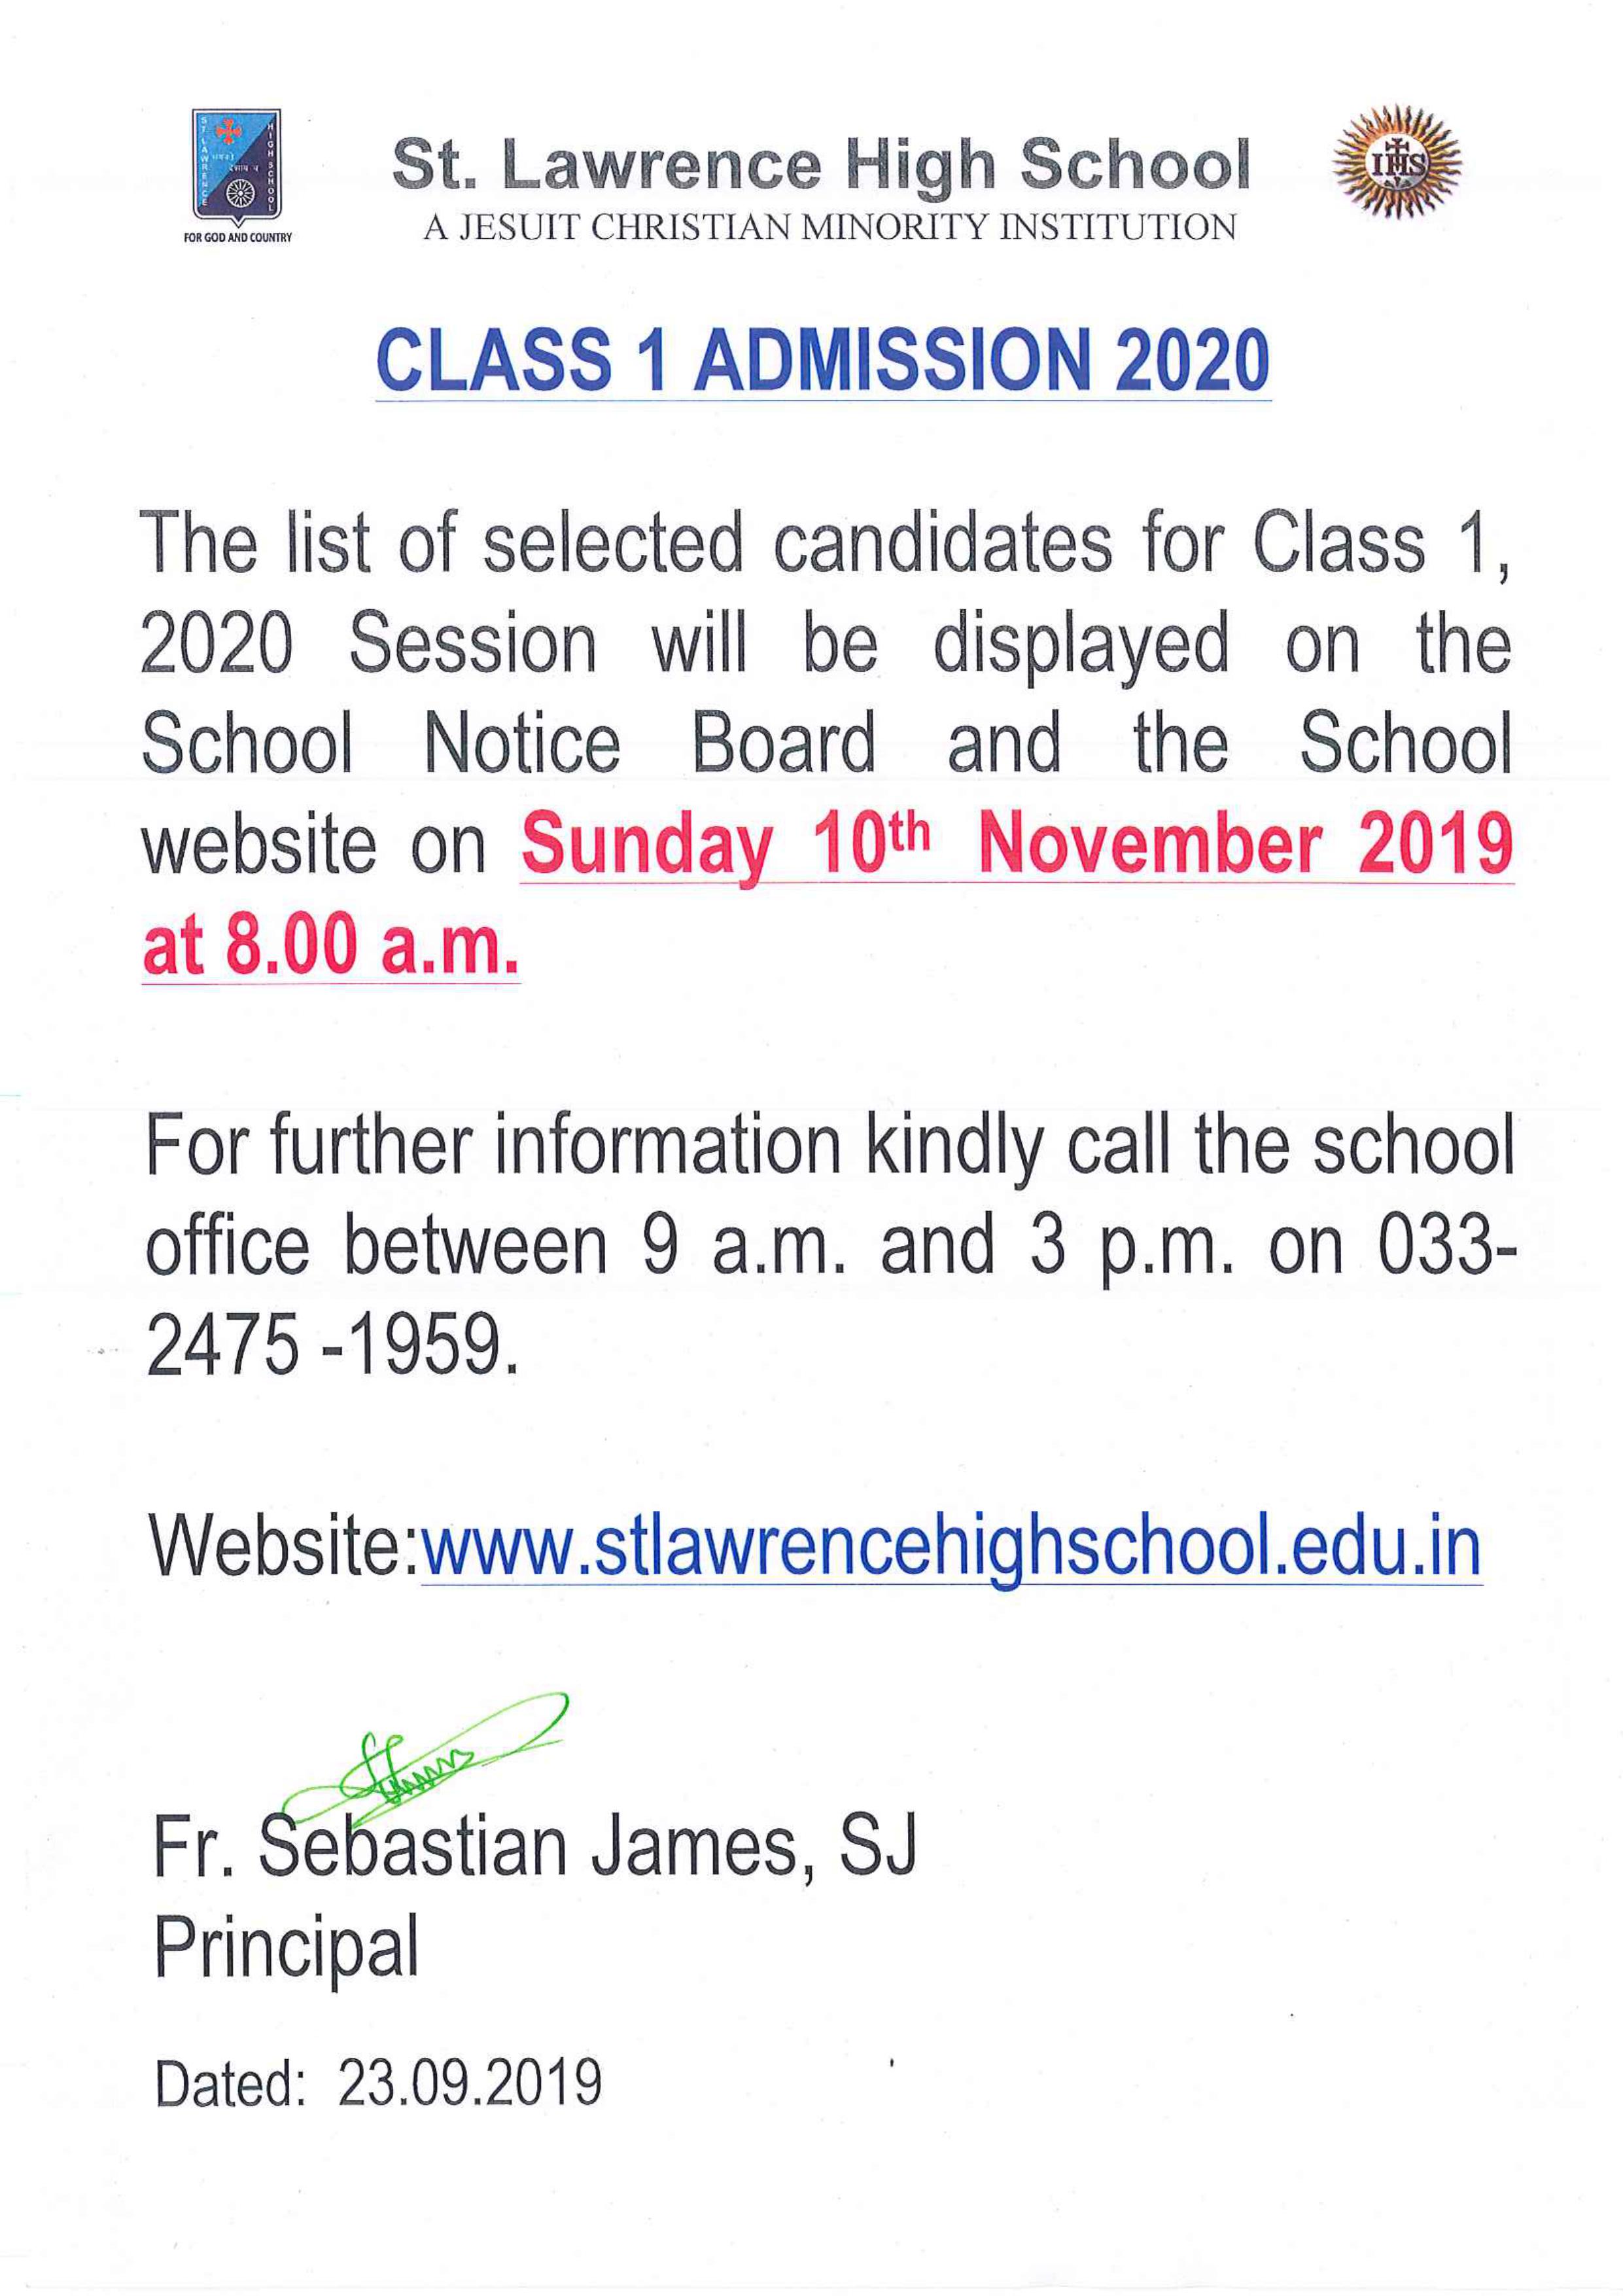 NOTICE FOR CLASS 1 ADMISSION - 2020